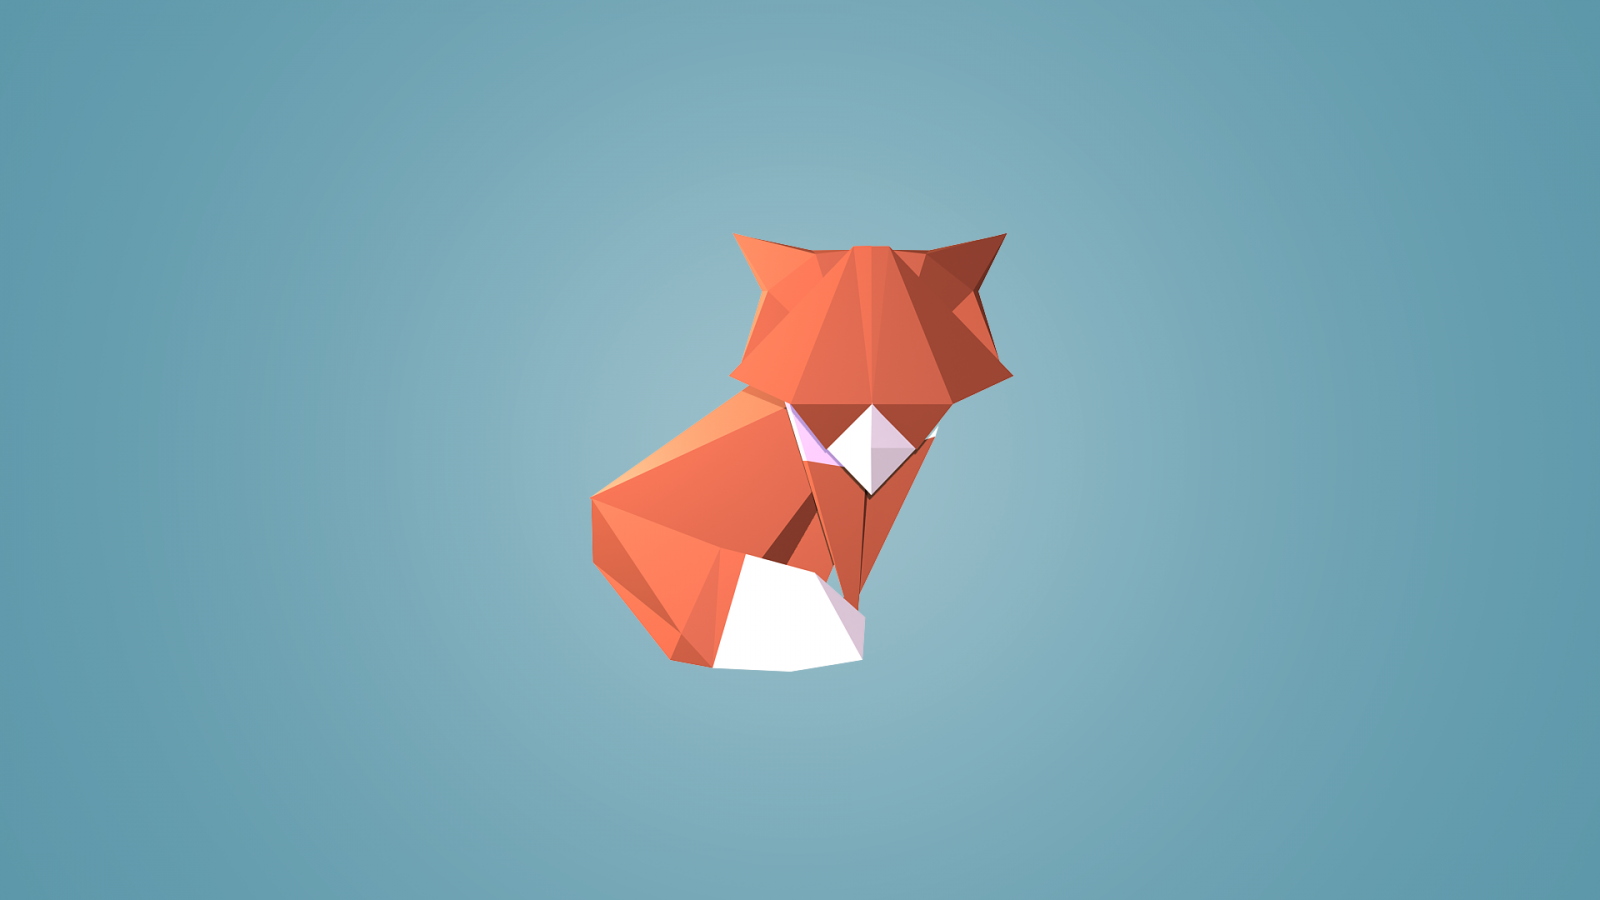 illustration, digital art, animals, simple background, red, blue background, low poly, triangle, geometry, origami, fox, Toy, ART, color, wing, computer wallpaper, origami paper, art paper. Mocah HD Wallpaper